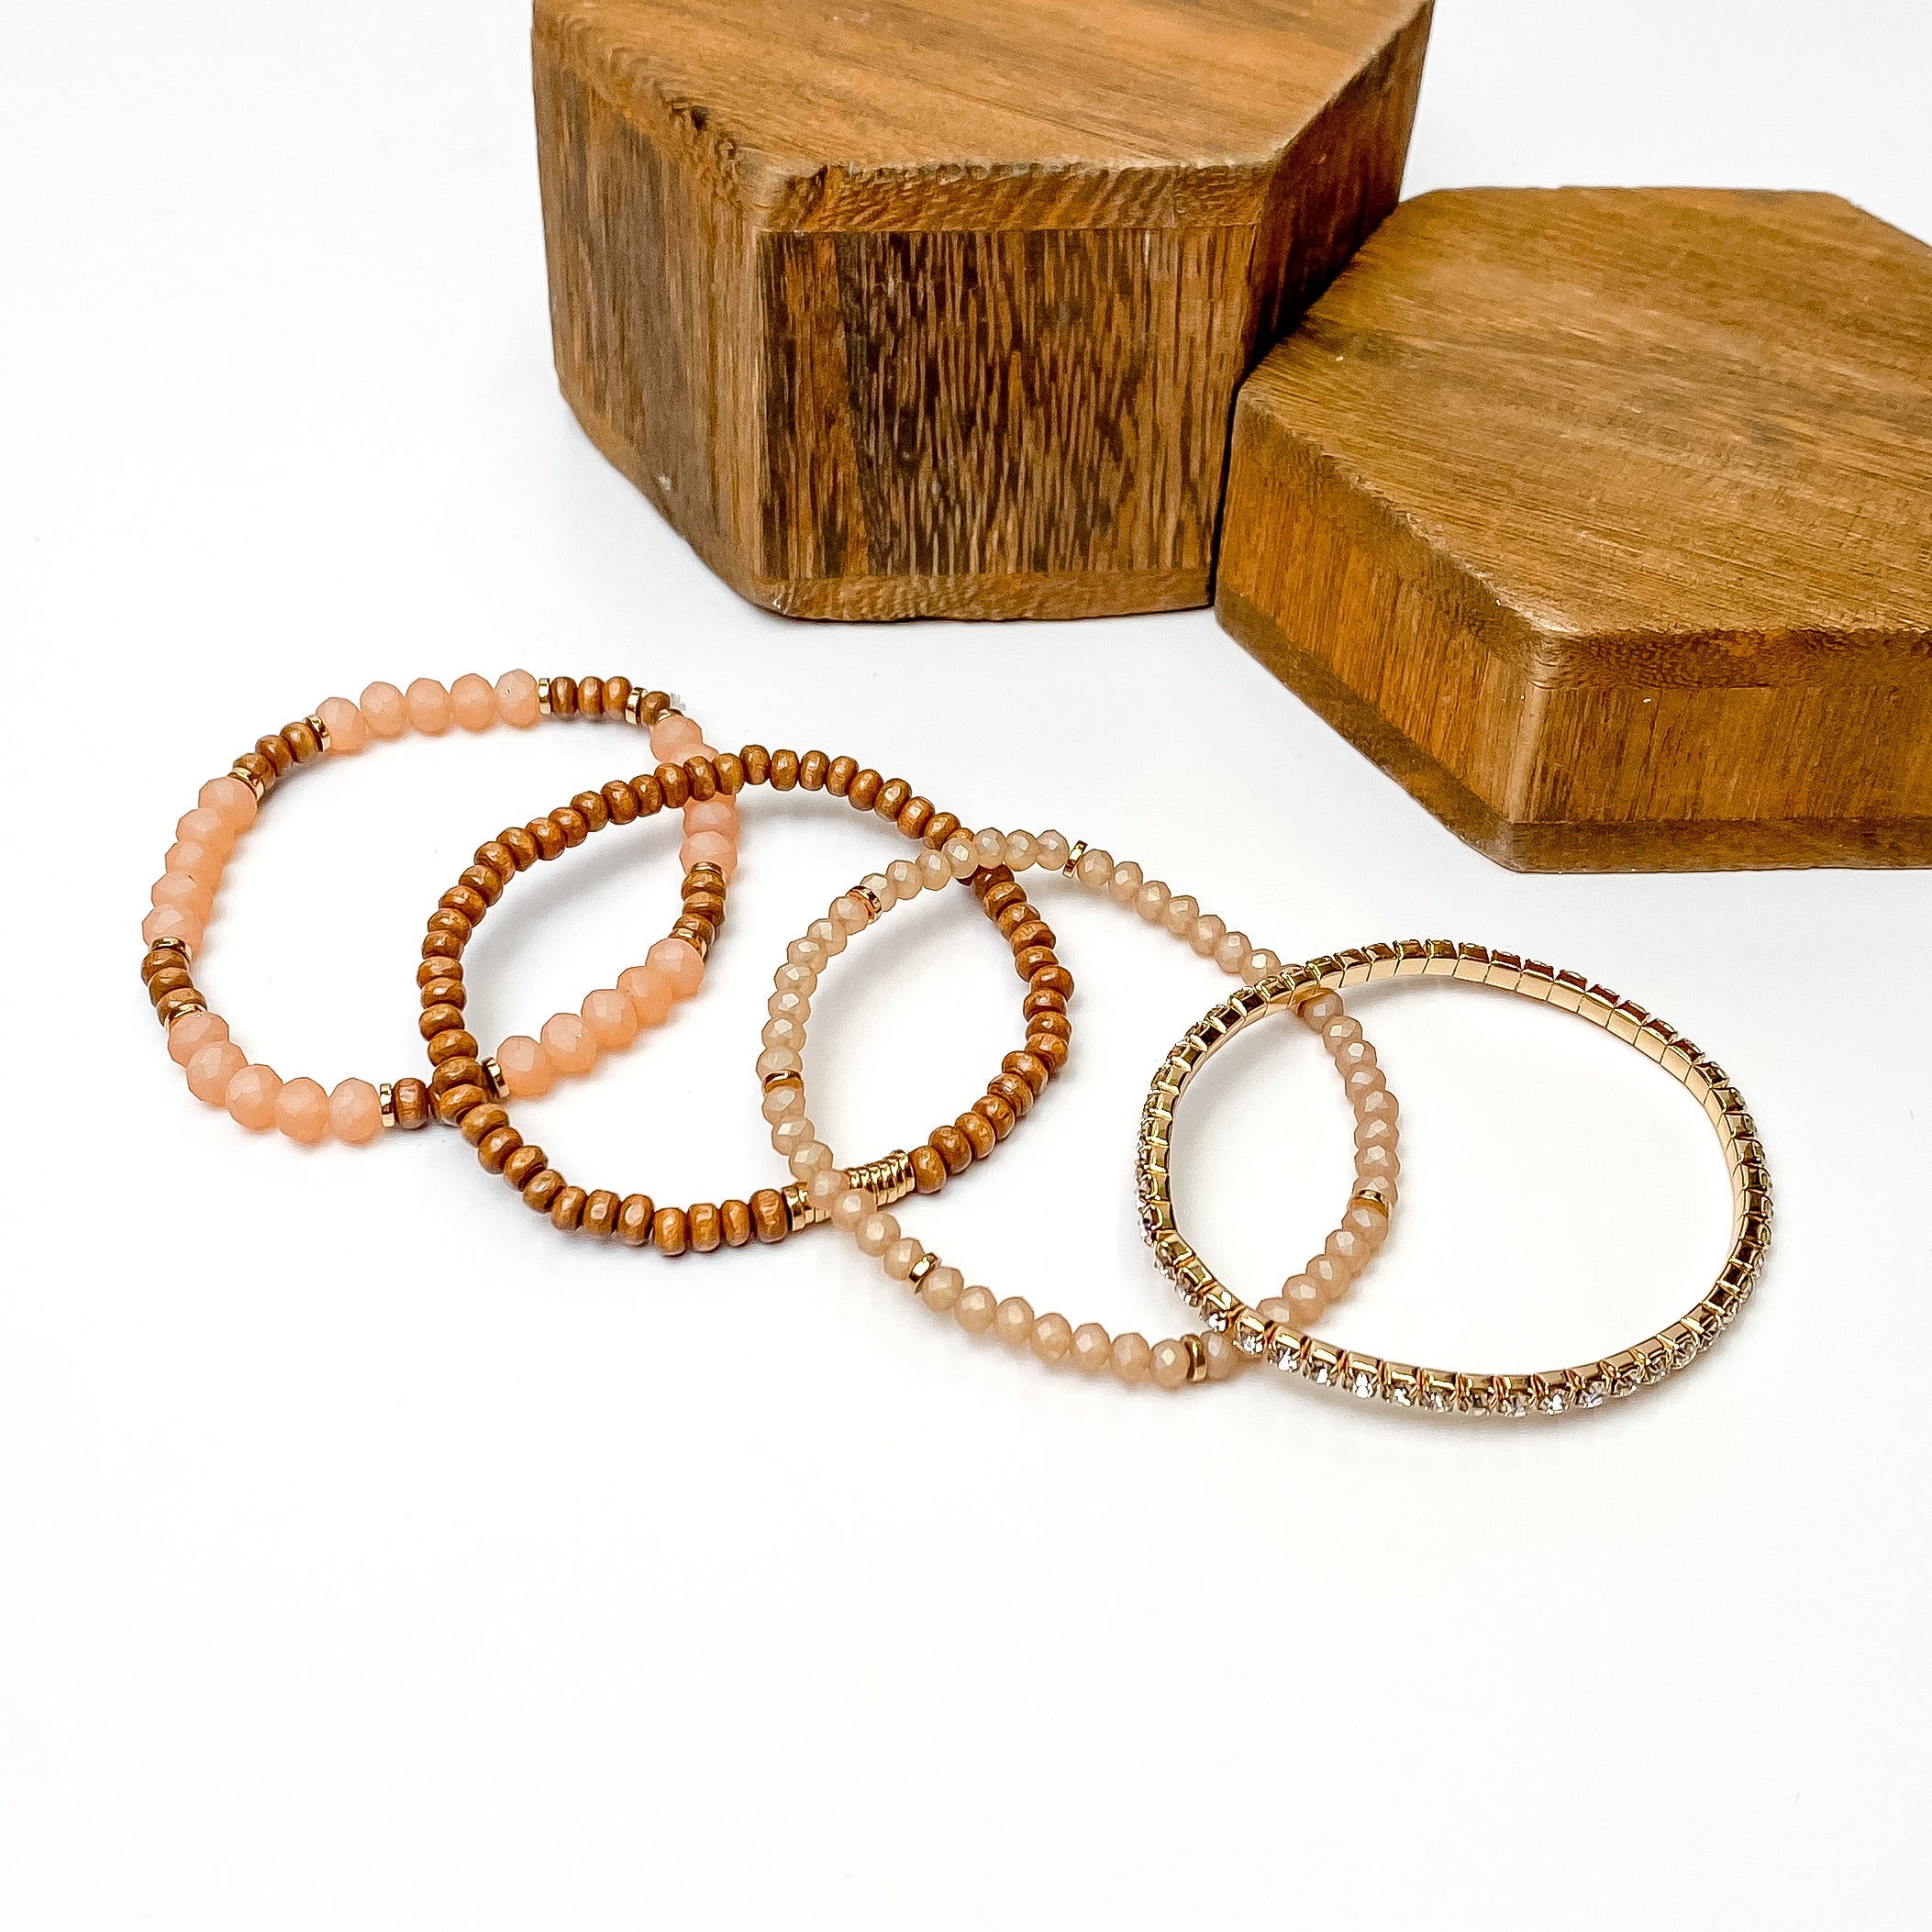 Set of four bracelets pictured laying one on top of the other. The bracelet at the top includes dusty pink and brown beads, the second has brown beads and gold disc beads, the third includes dusty pink beads with gold disk spacers, and the last bracelet is a full crystal band with a gold setting. These bracelets are pictured on a white background with brown blocks in the top right corner. 